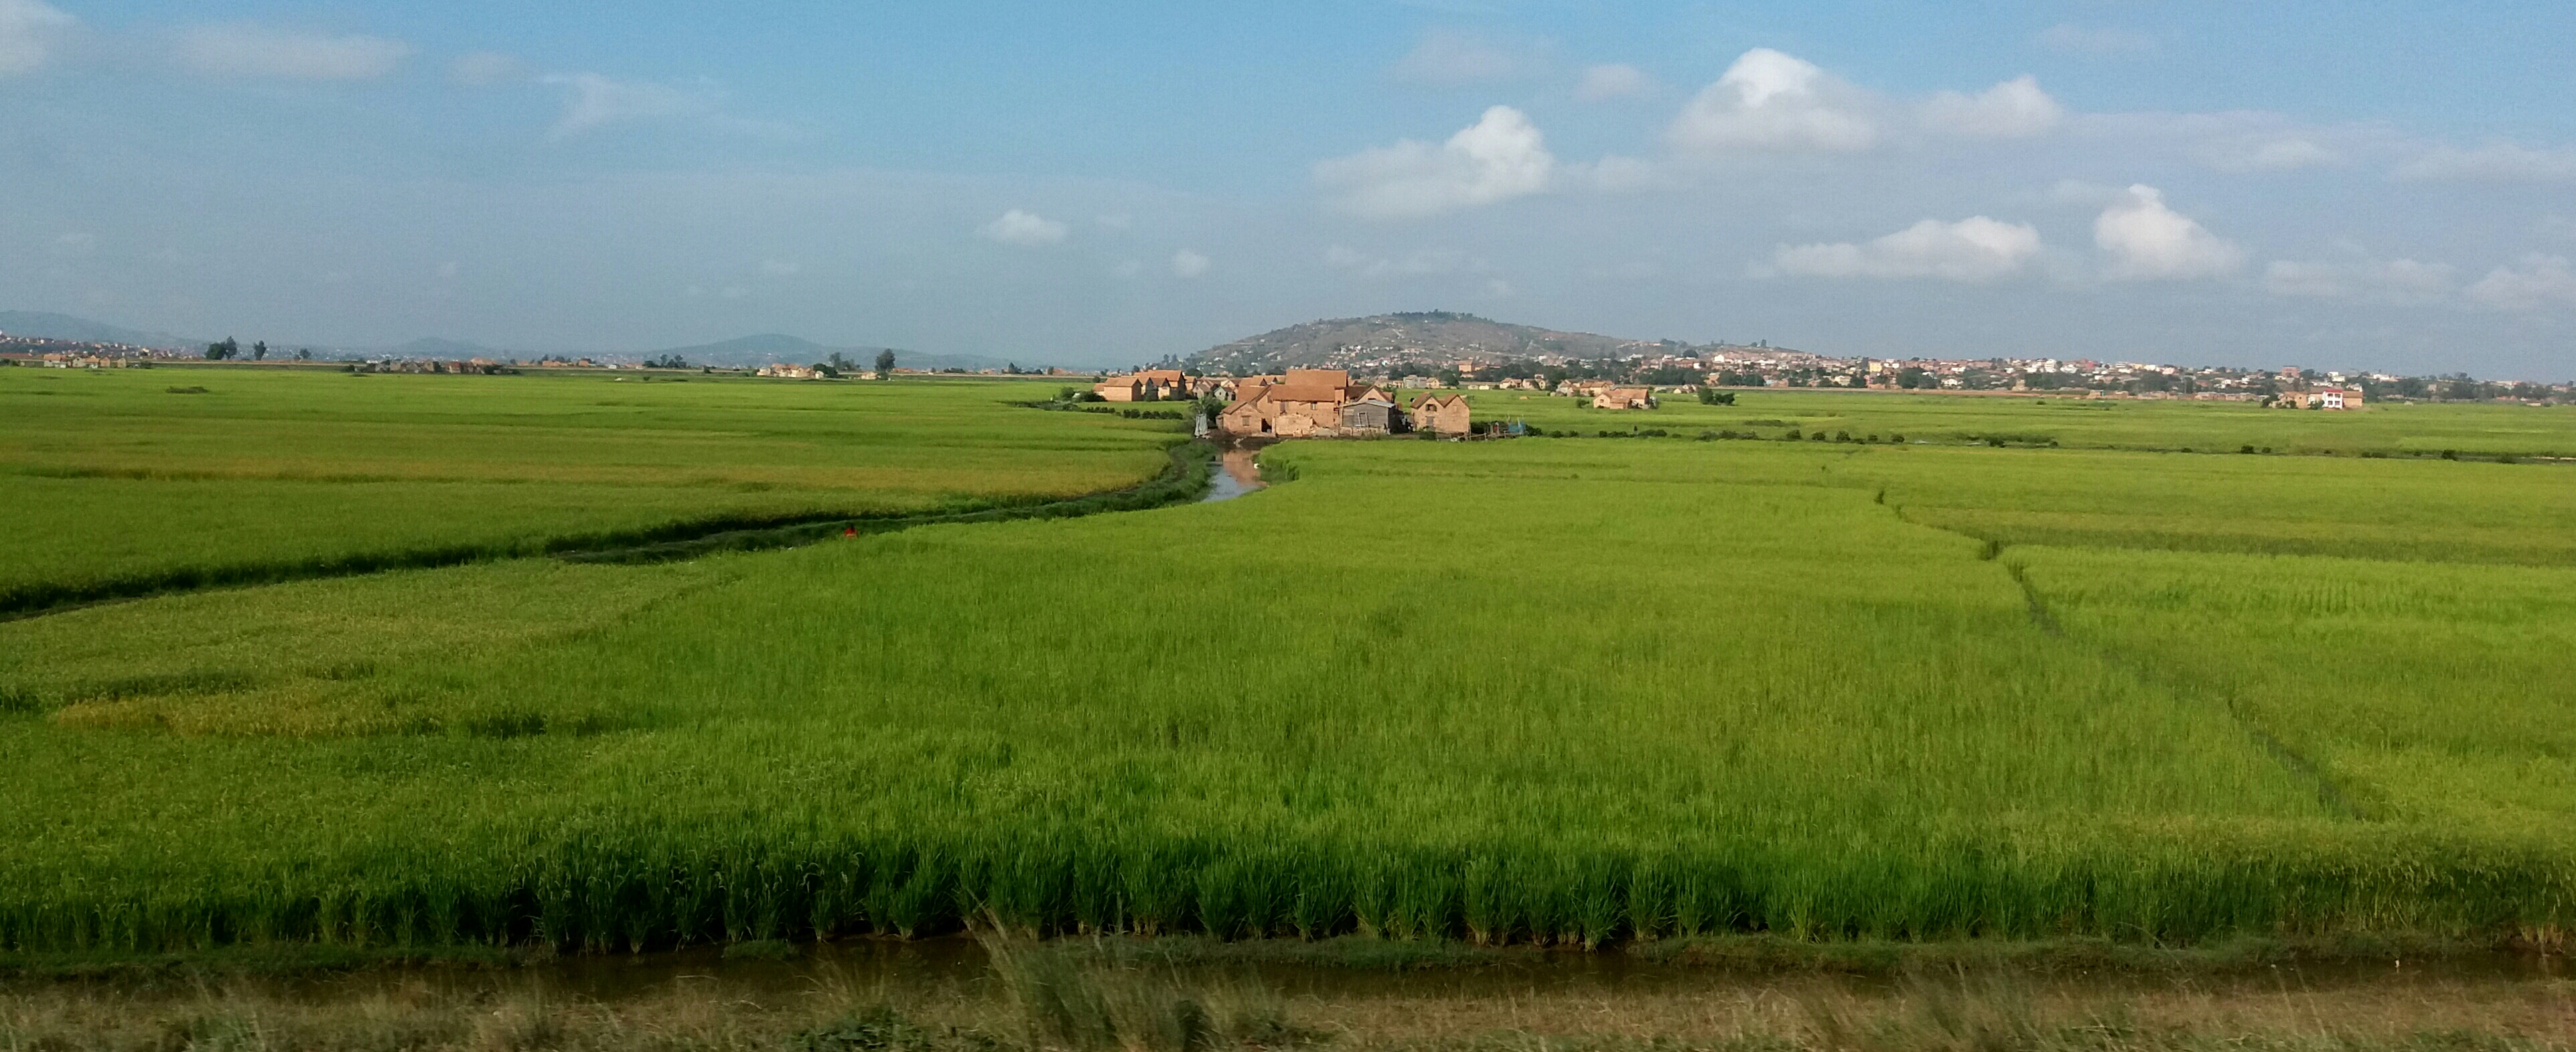 Rice fields and simplicity